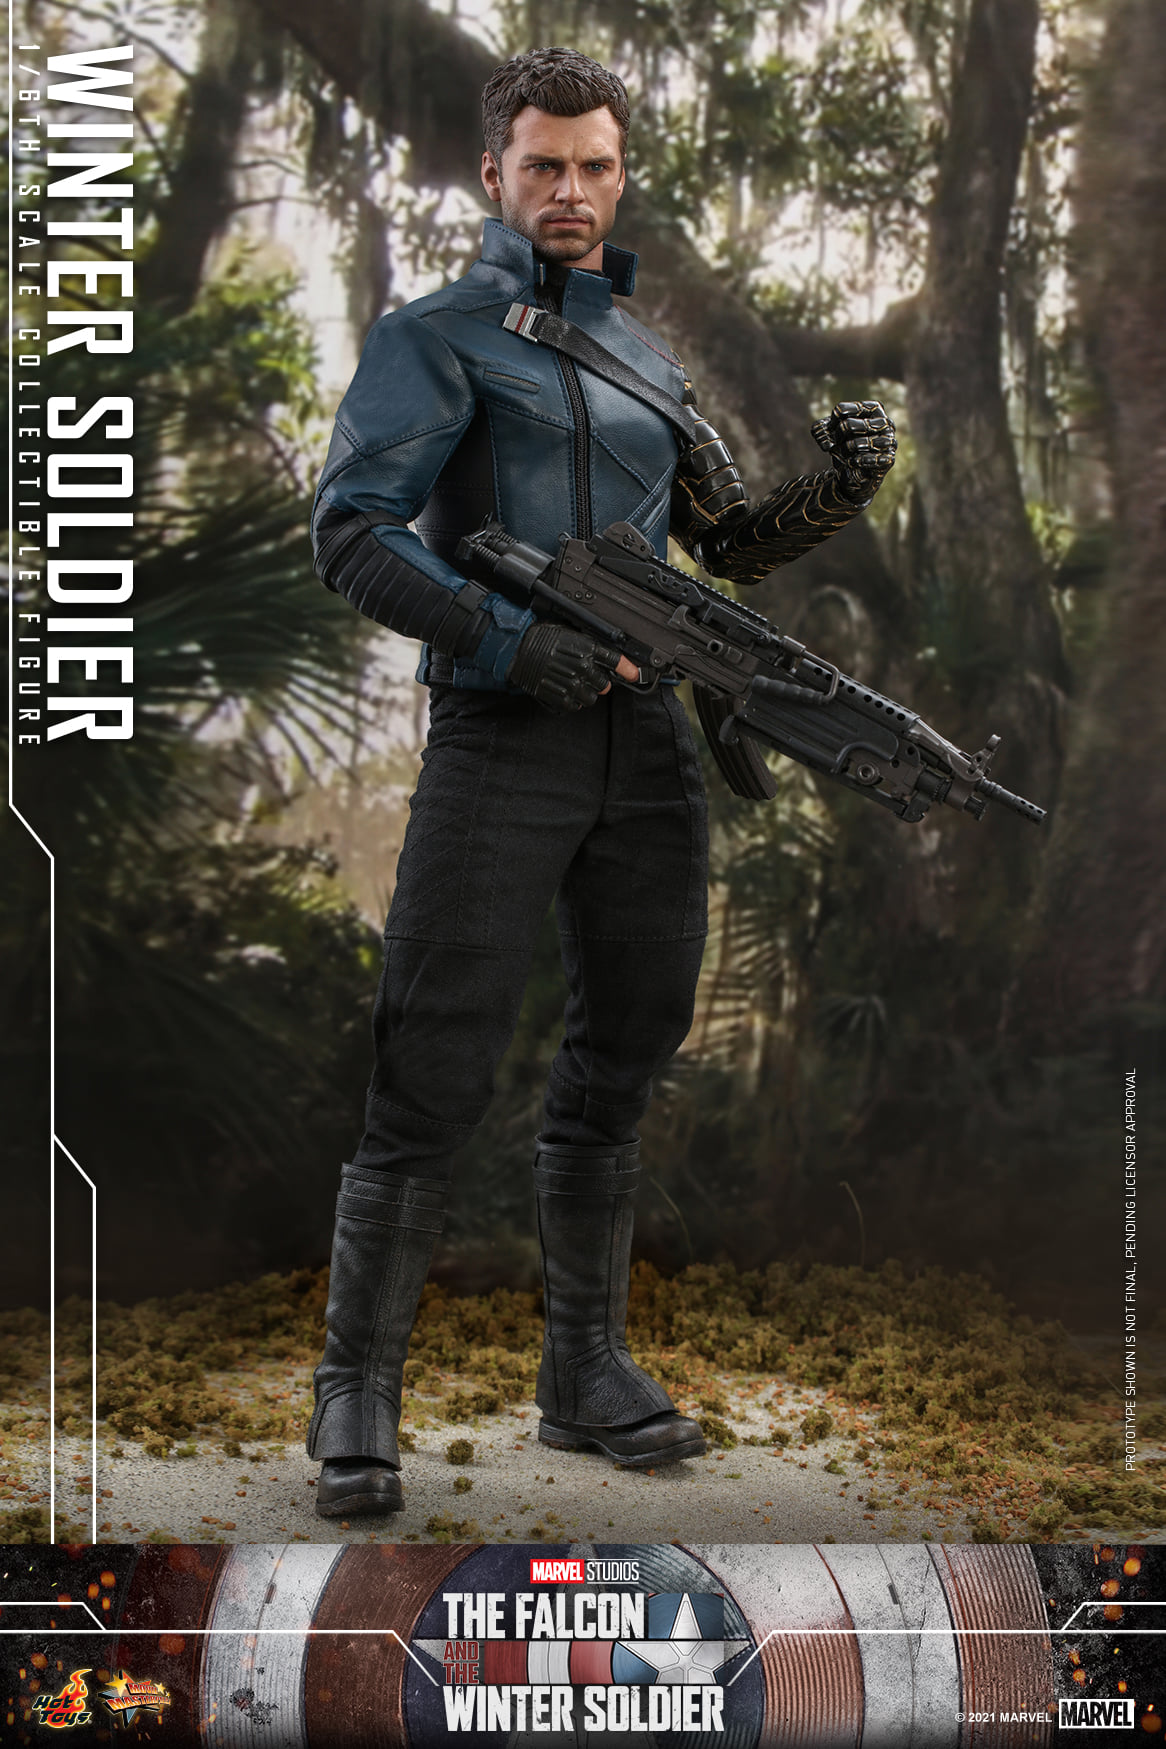 Hot Toys Marvel Winter Soldier Sixth Scale Figure